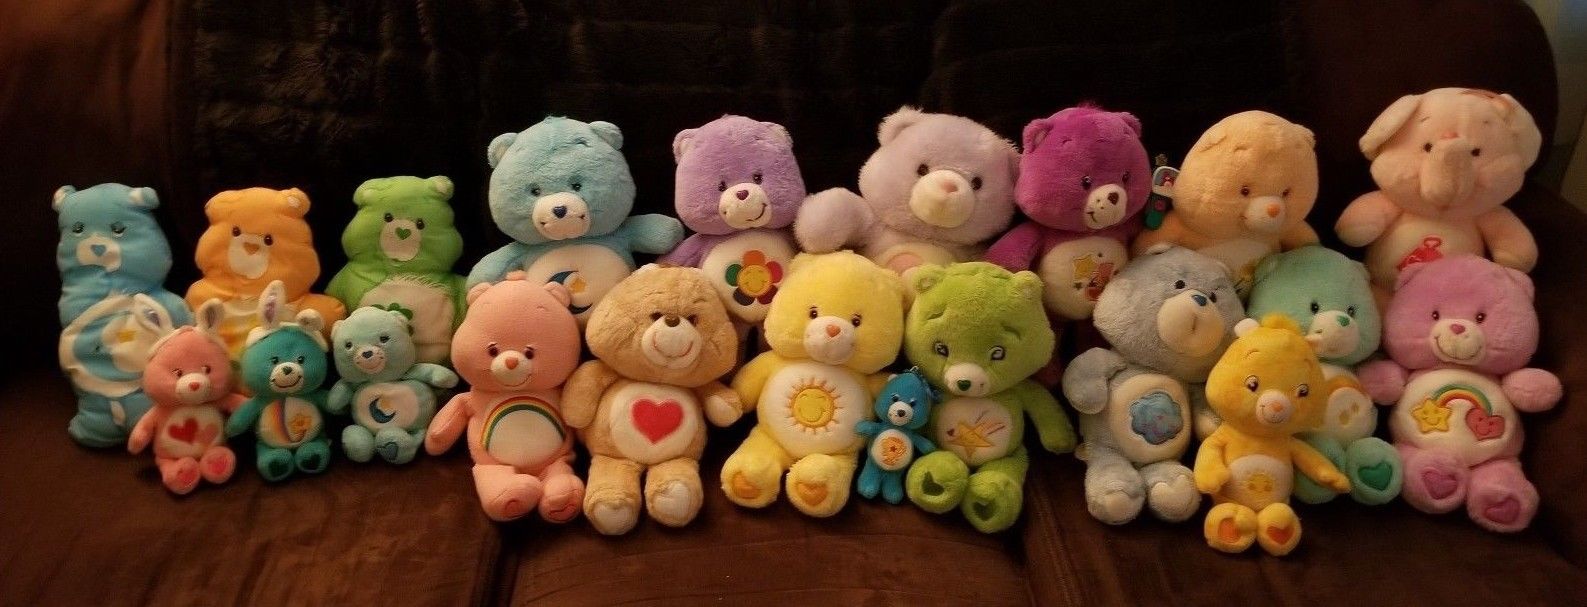 21 Care Bears Stuffed Animals Lot Some Vintage RARE Elephant Bunny Pillow & More